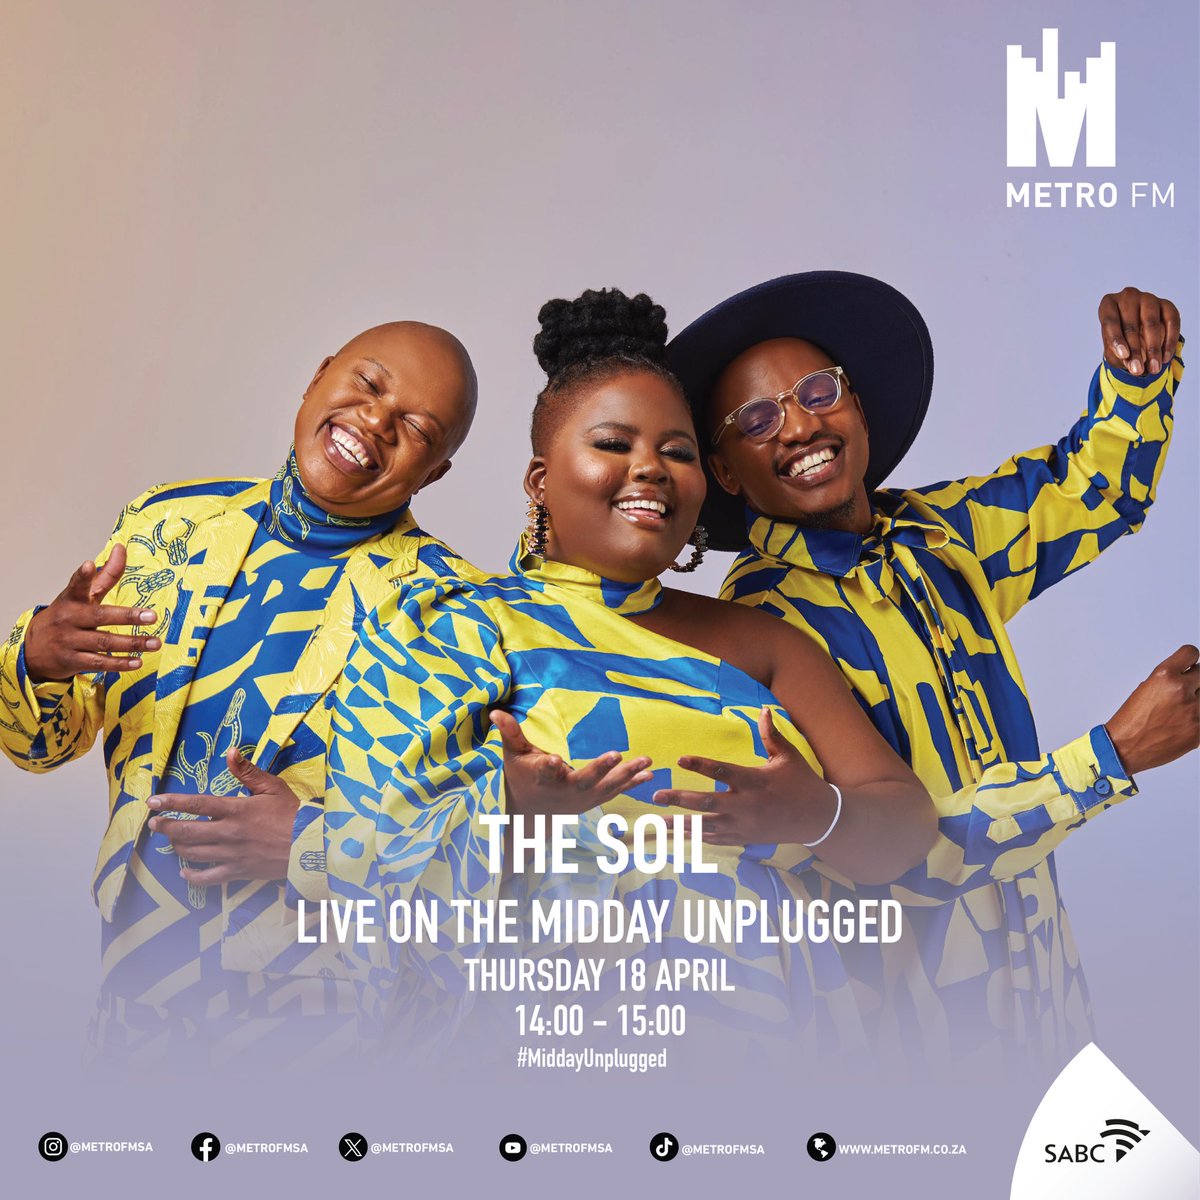 Catch @TheSoilMusic performing LIVE on #TheMiddayUnplugged from 14:00 #TML